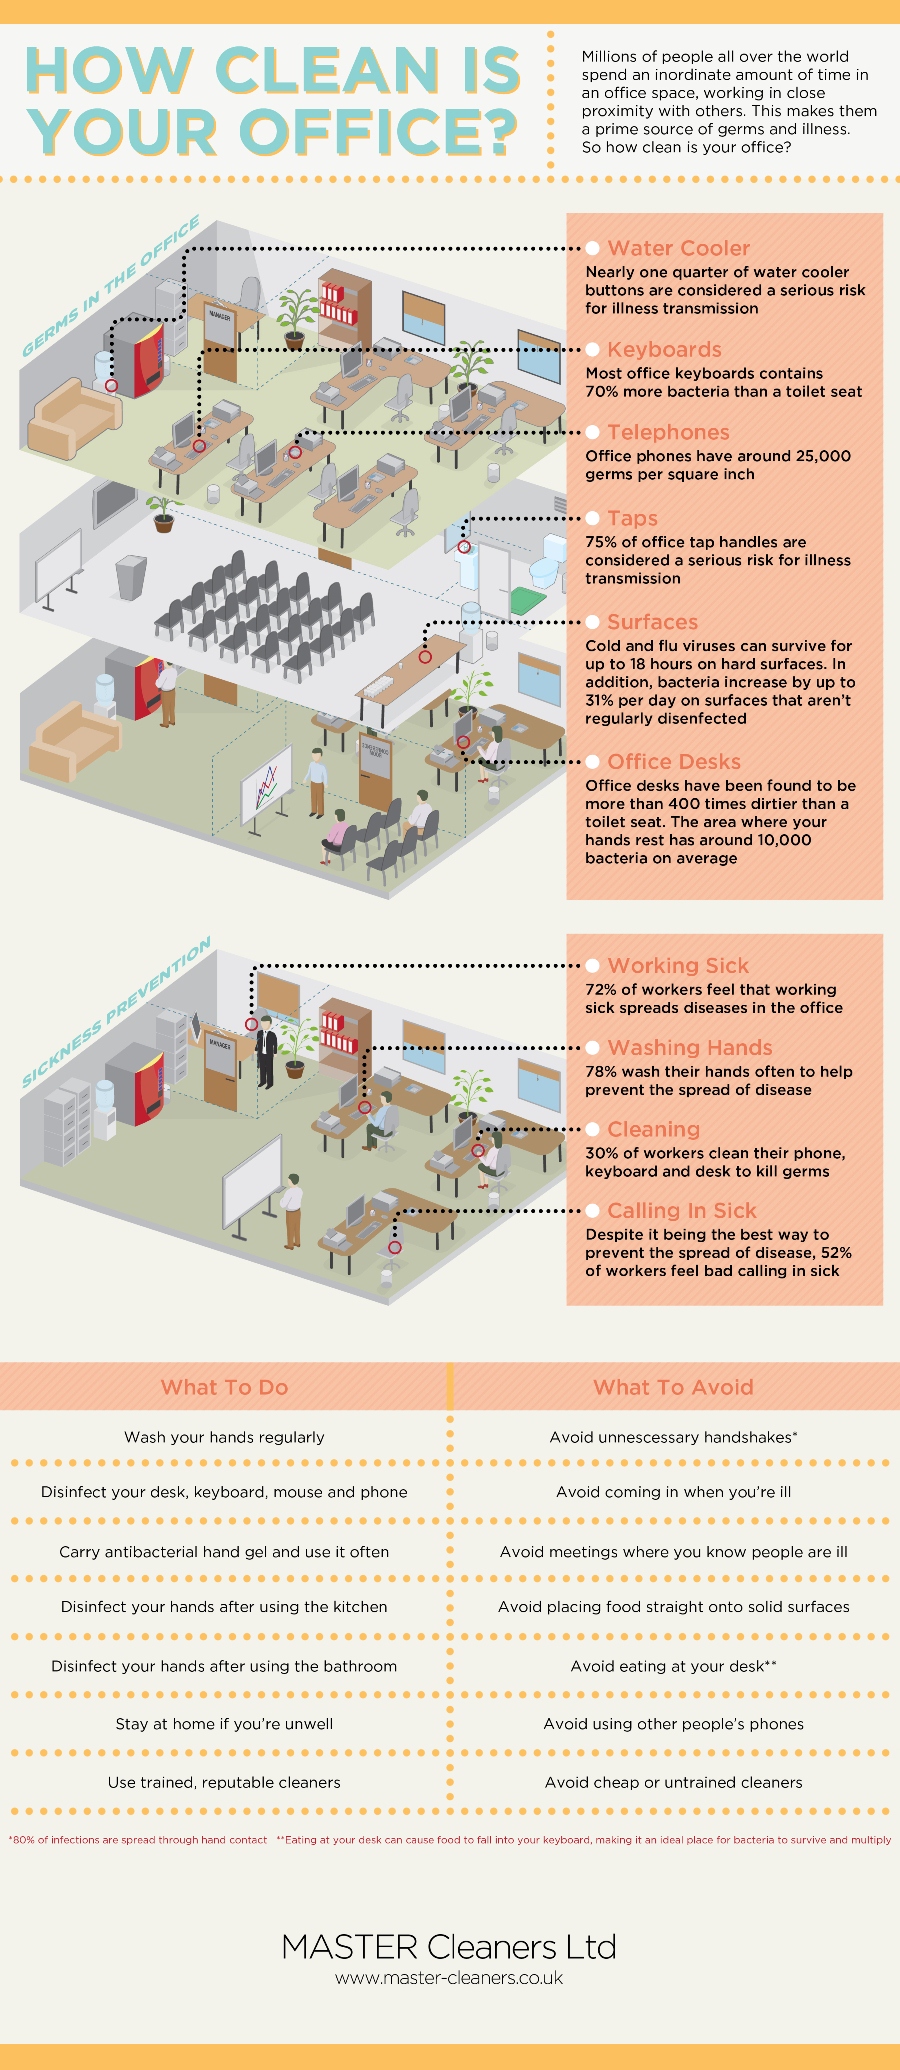 Clean Up Your Office, and Your Health - Infographic